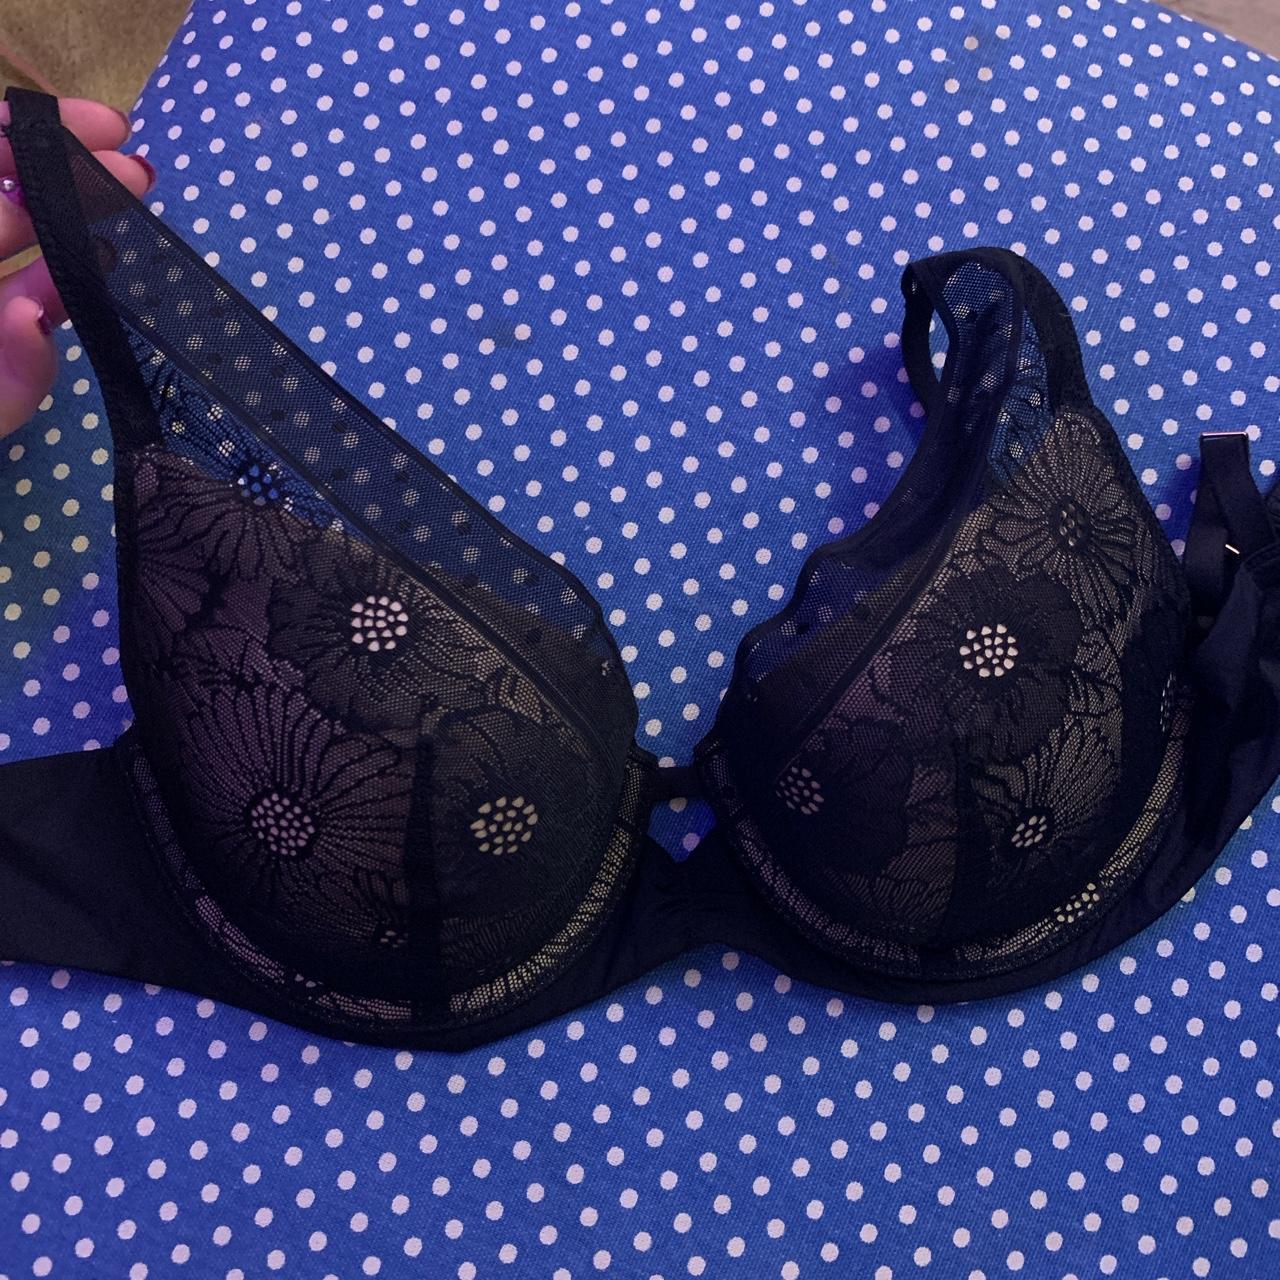 30D in Aerie – What Bra Sizes Look Like